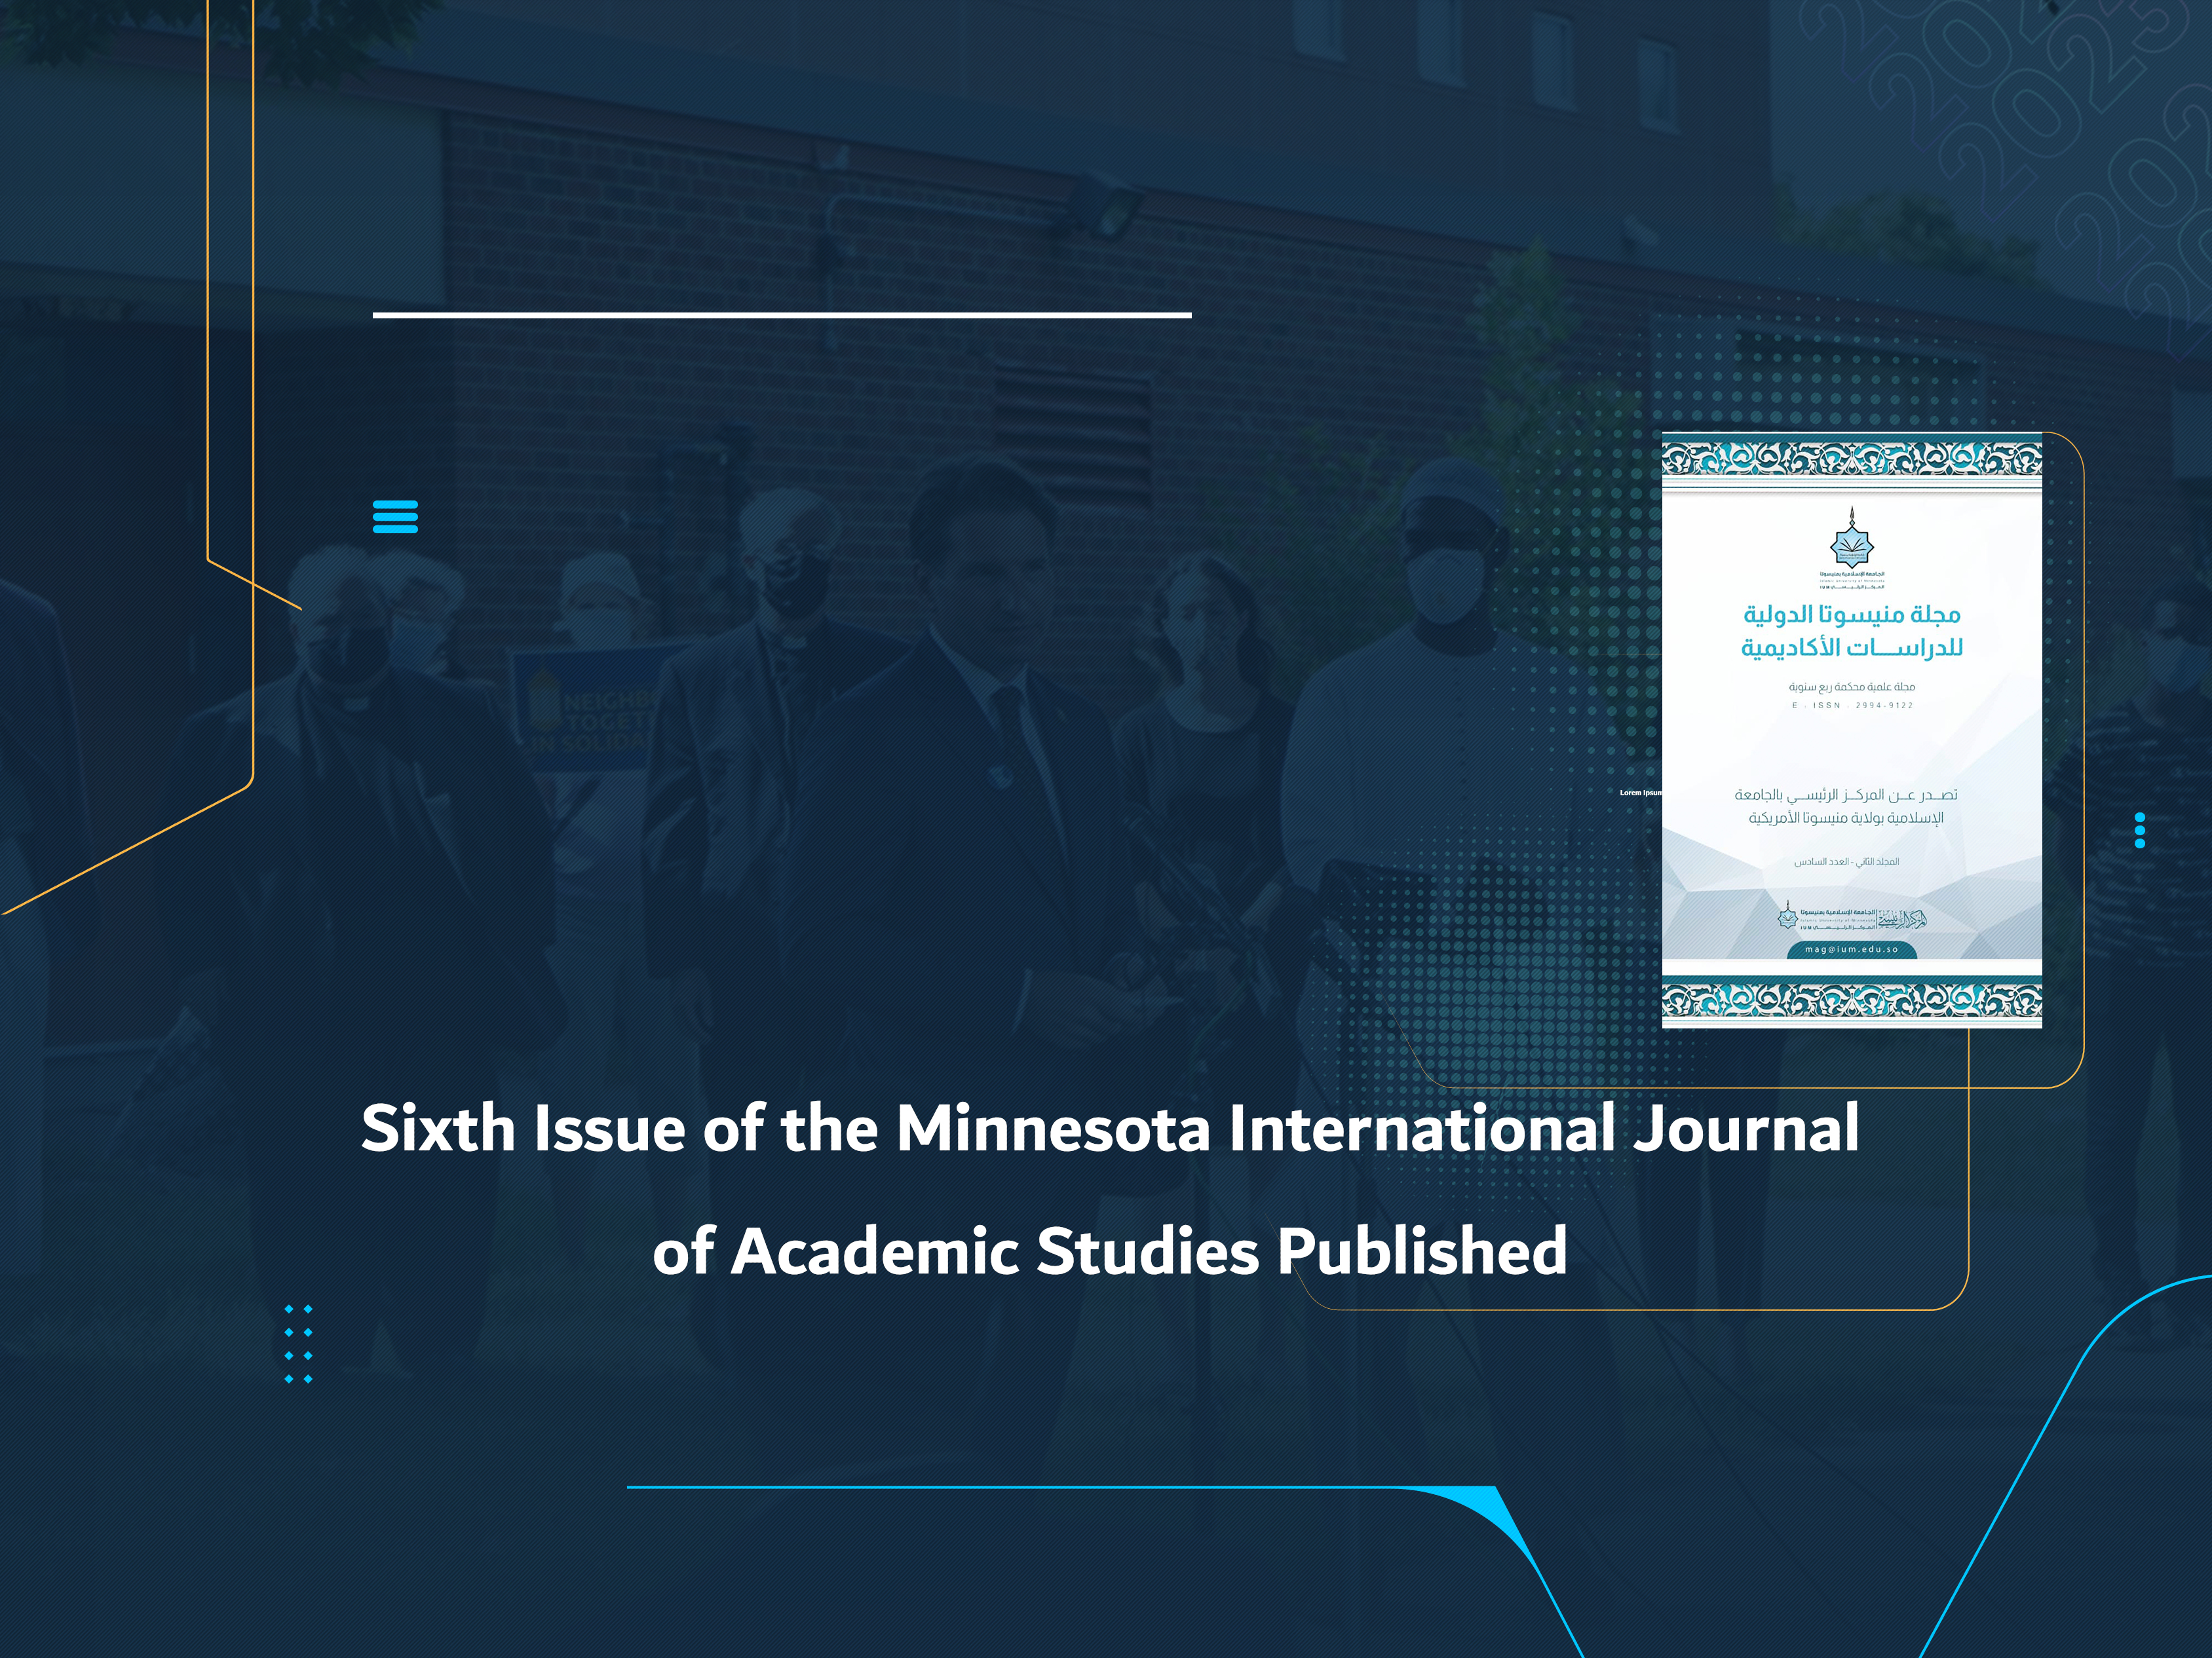 Sixth Issue of the Minnesota International Journal of Academic Studies Published